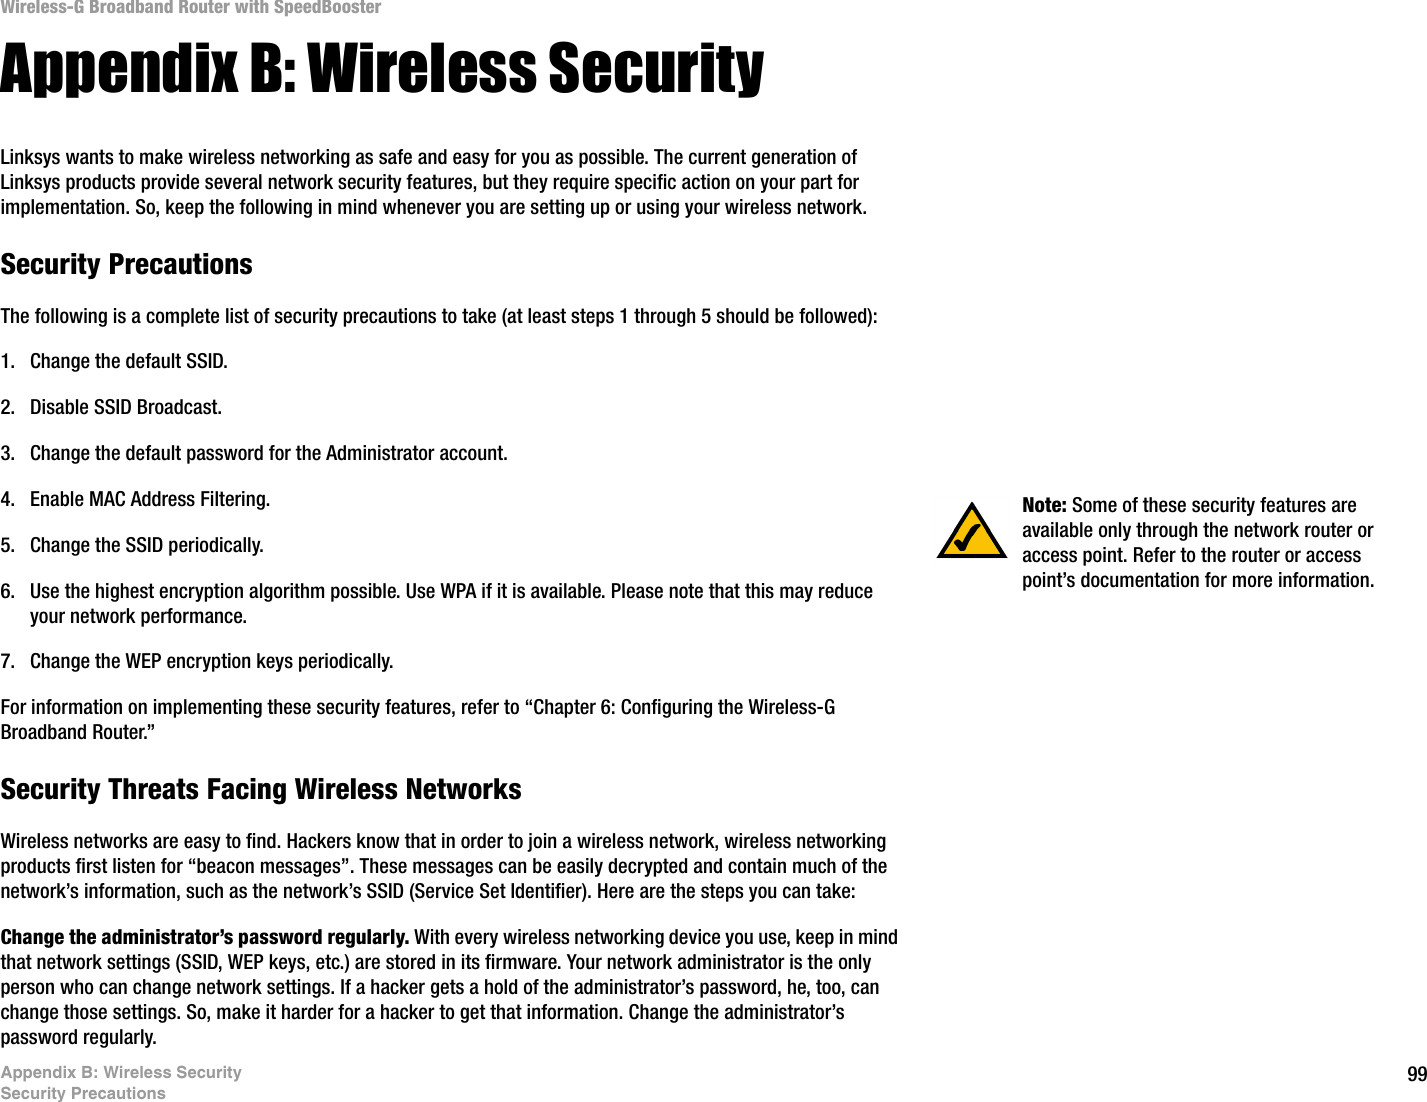 99Appendix B: Wireless SecuritySecurity PrecautionsWireless-G Broadband Router with SpeedBoosterAppendix B: Wireless SecurityLinksys wants to make wireless networking as safe and easy for you as possible. The current generation of Linksys products provide several network security features, but they require specific action on your part for implementation. So, keep the following in mind whenever you are setting up or using your wireless network.Security PrecautionsThe following is a complete list of security precautions to take (at least steps 1 through 5 should be followed):1. Change the default SSID. 2. Disable SSID Broadcast. 3. Change the default password for the Administrator account. 4. Enable MAC Address Filtering. 5. Change the SSID periodically. 6. Use the highest encryption algorithm possible. Use WPA if it is available. Please note that this may reduce your network performance. 7. Change the WEP encryption keys periodically. For information on implementing these security features, refer to “Chapter 6: Configuring the Wireless-G Broadband Router.”Security Threats Facing Wireless Networks Wireless networks are easy to find. Hackers know that in order to join a wireless network, wireless networking products first listen for “beacon messages”. These messages can be easily decrypted and contain much of the network’s information, such as the network’s SSID (Service Set Identifier). Here are the steps you can take:Change the administrator’s password regularly. With every wireless networking device you use, keep in mind that network settings (SSID, WEP keys, etc.) are stored in its firmware. Your network administrator is the only person who can change network settings. If a hacker gets a hold of the administrator’s password, he, too, can change those settings. So, make it harder for a hacker to get that information. Change the administrator’s password regularly.Note: Some of these security features are available only through the network router or access point. Refer to the router or access point’s documentation for more information.